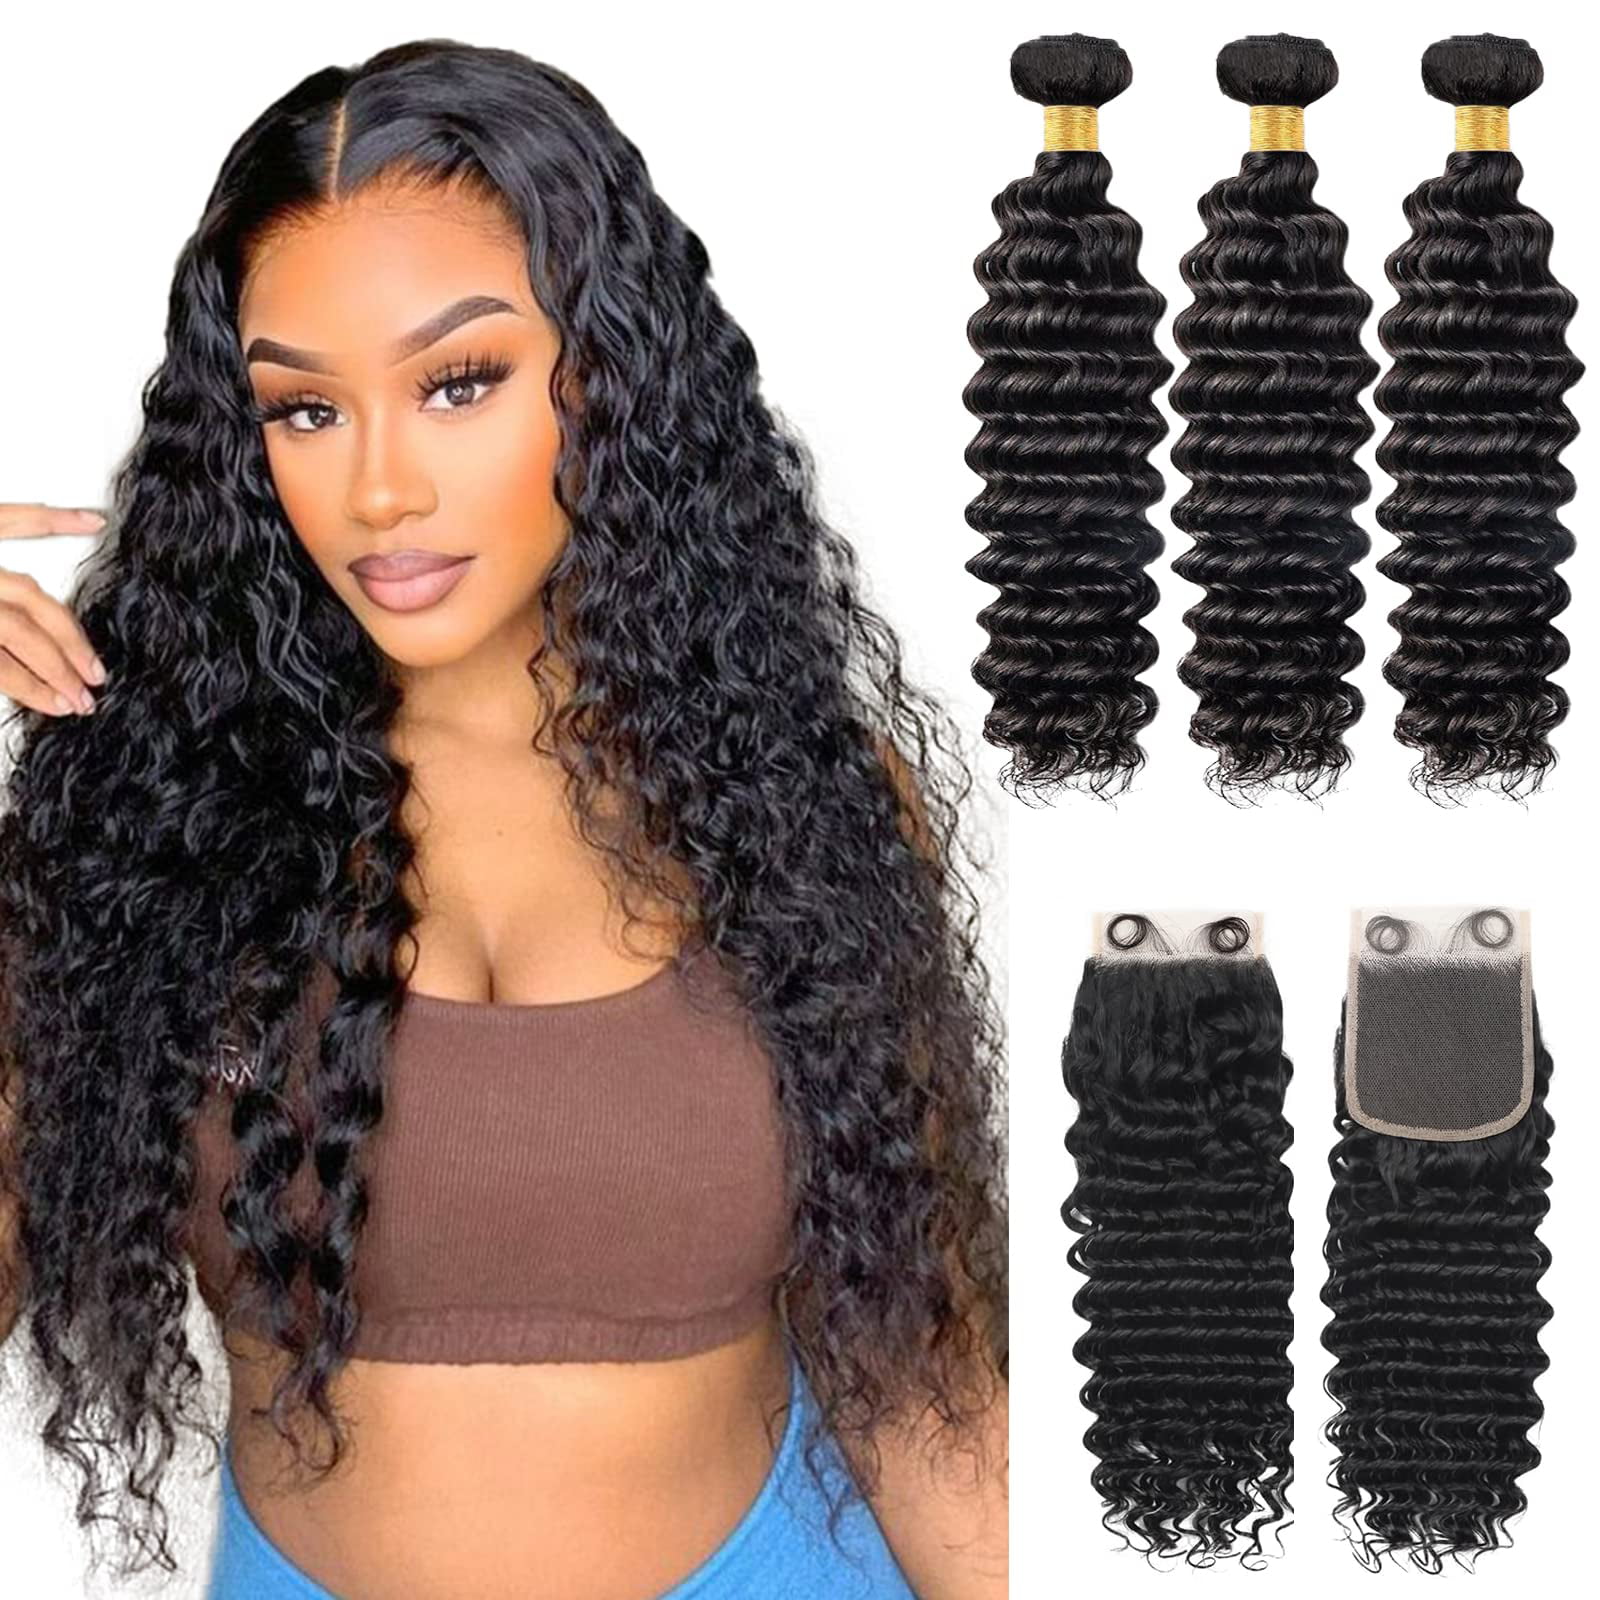 Deep Wave (22 24 26+20) Bundles With Closure Human Hair 100% Unprocessed  Brazilian Body Wave 3 Curly Human Hair Bundles Weave With 4X4 Free Part  With Frontal Hd Lace Frontal Wavy Natural